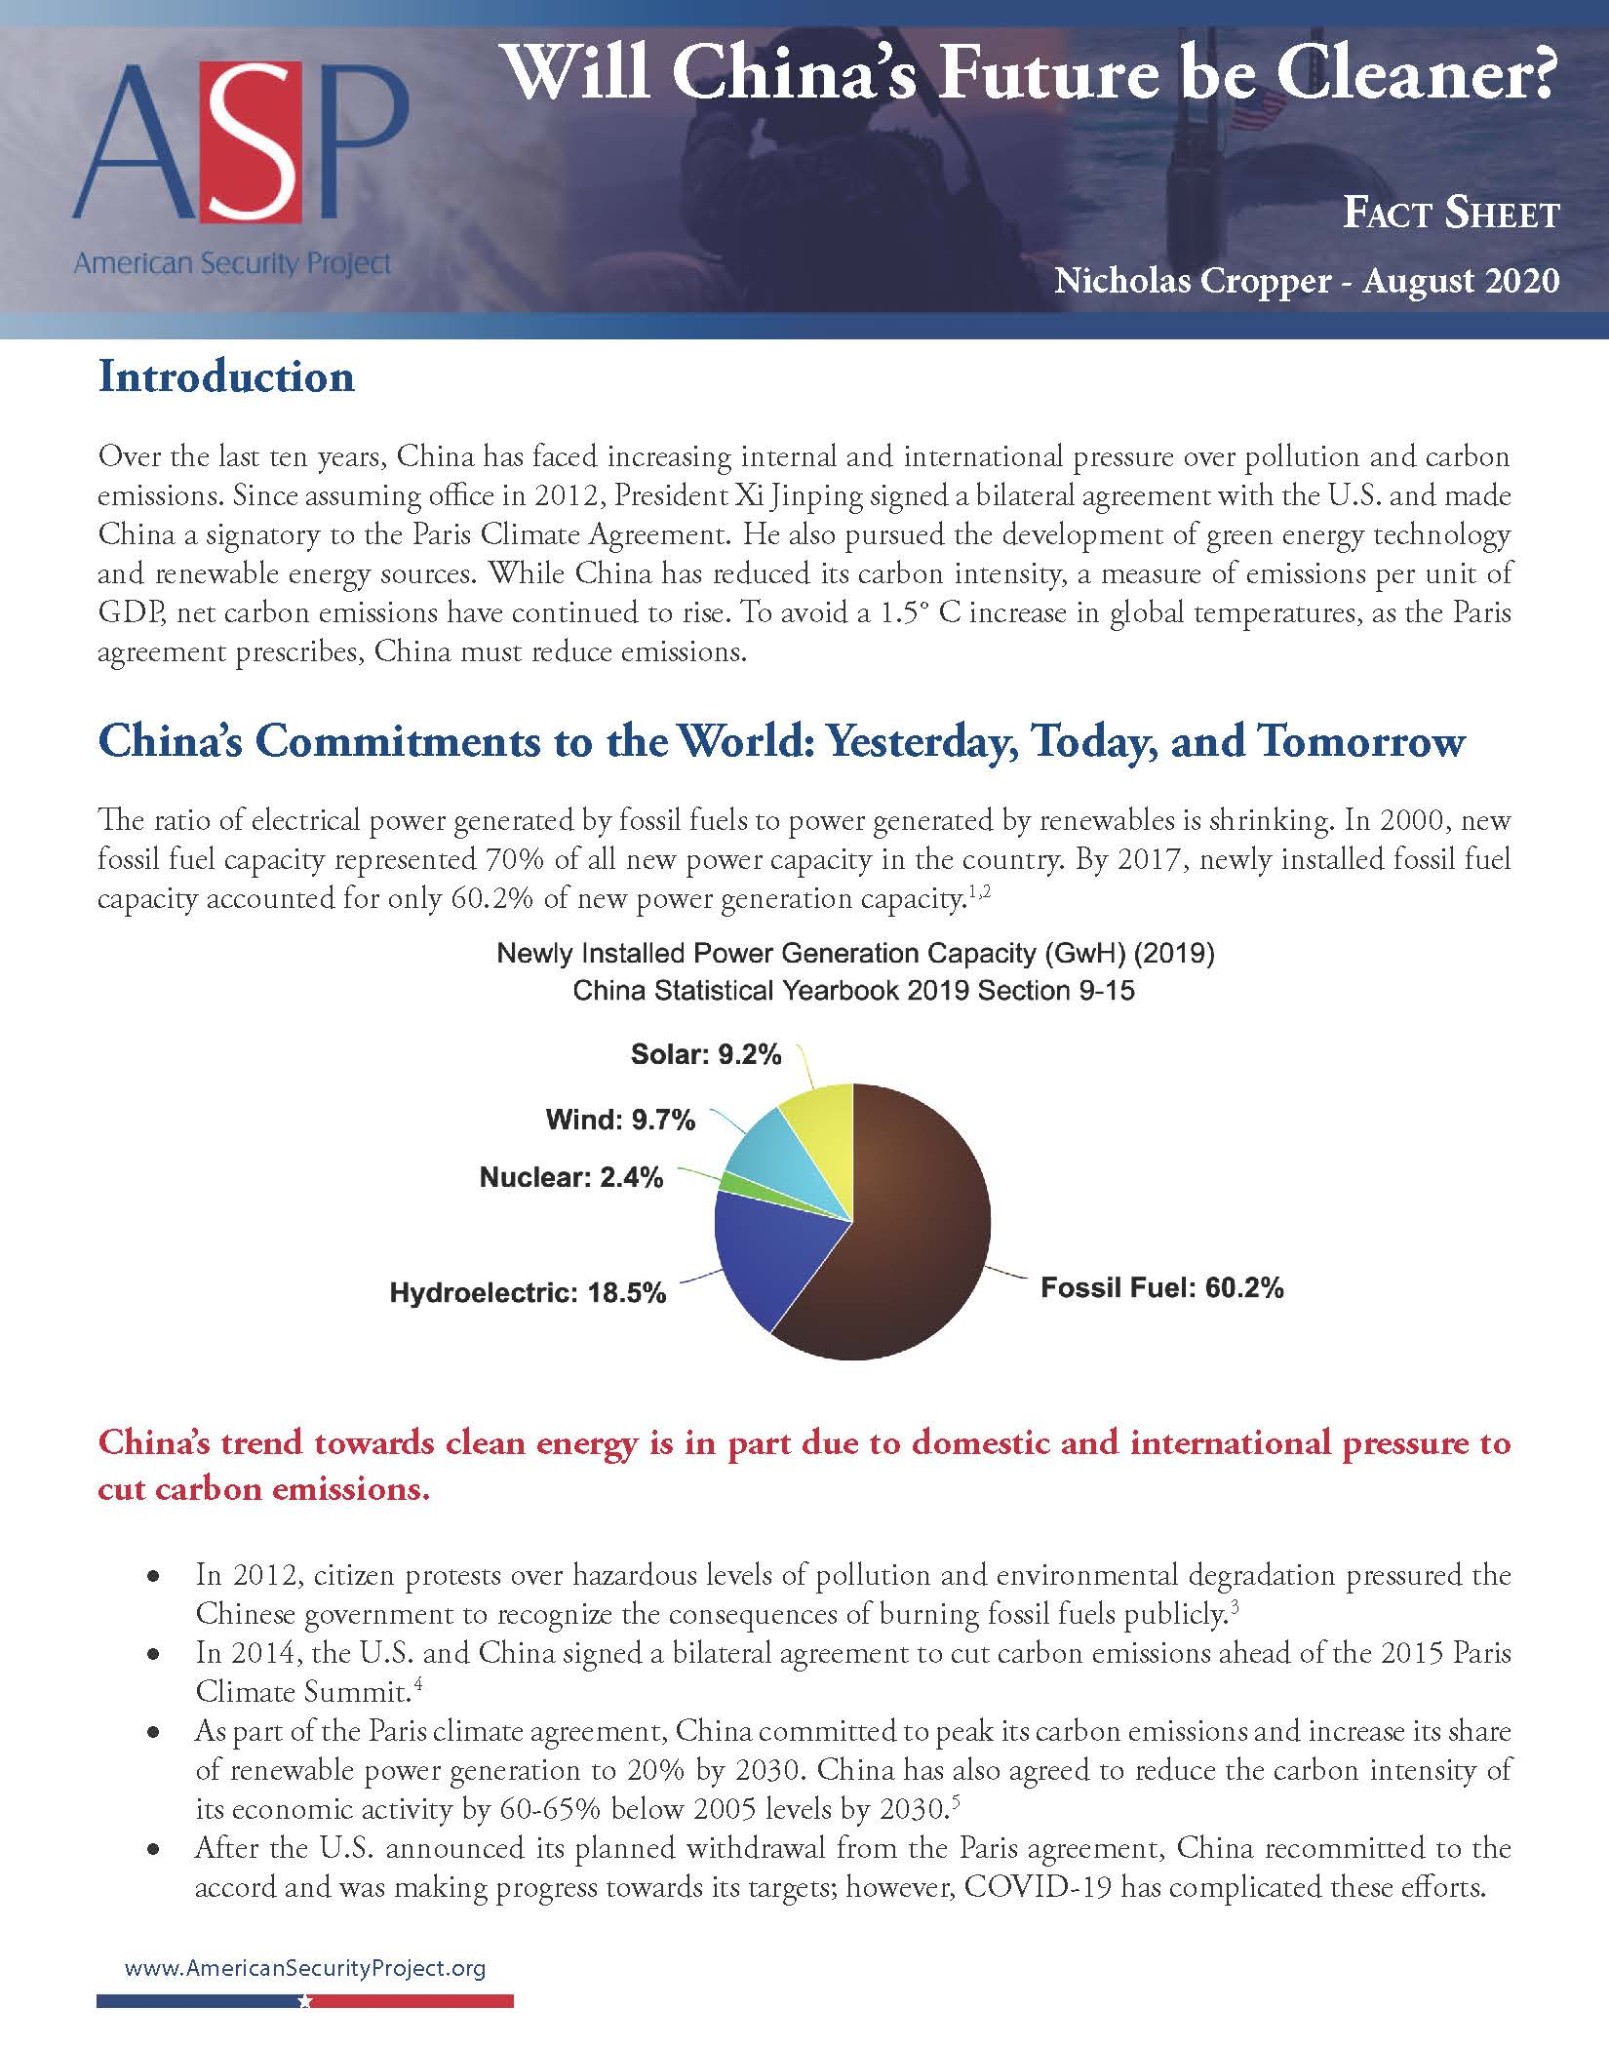 Fact Sheet – Will China’s Future be Cleaner?